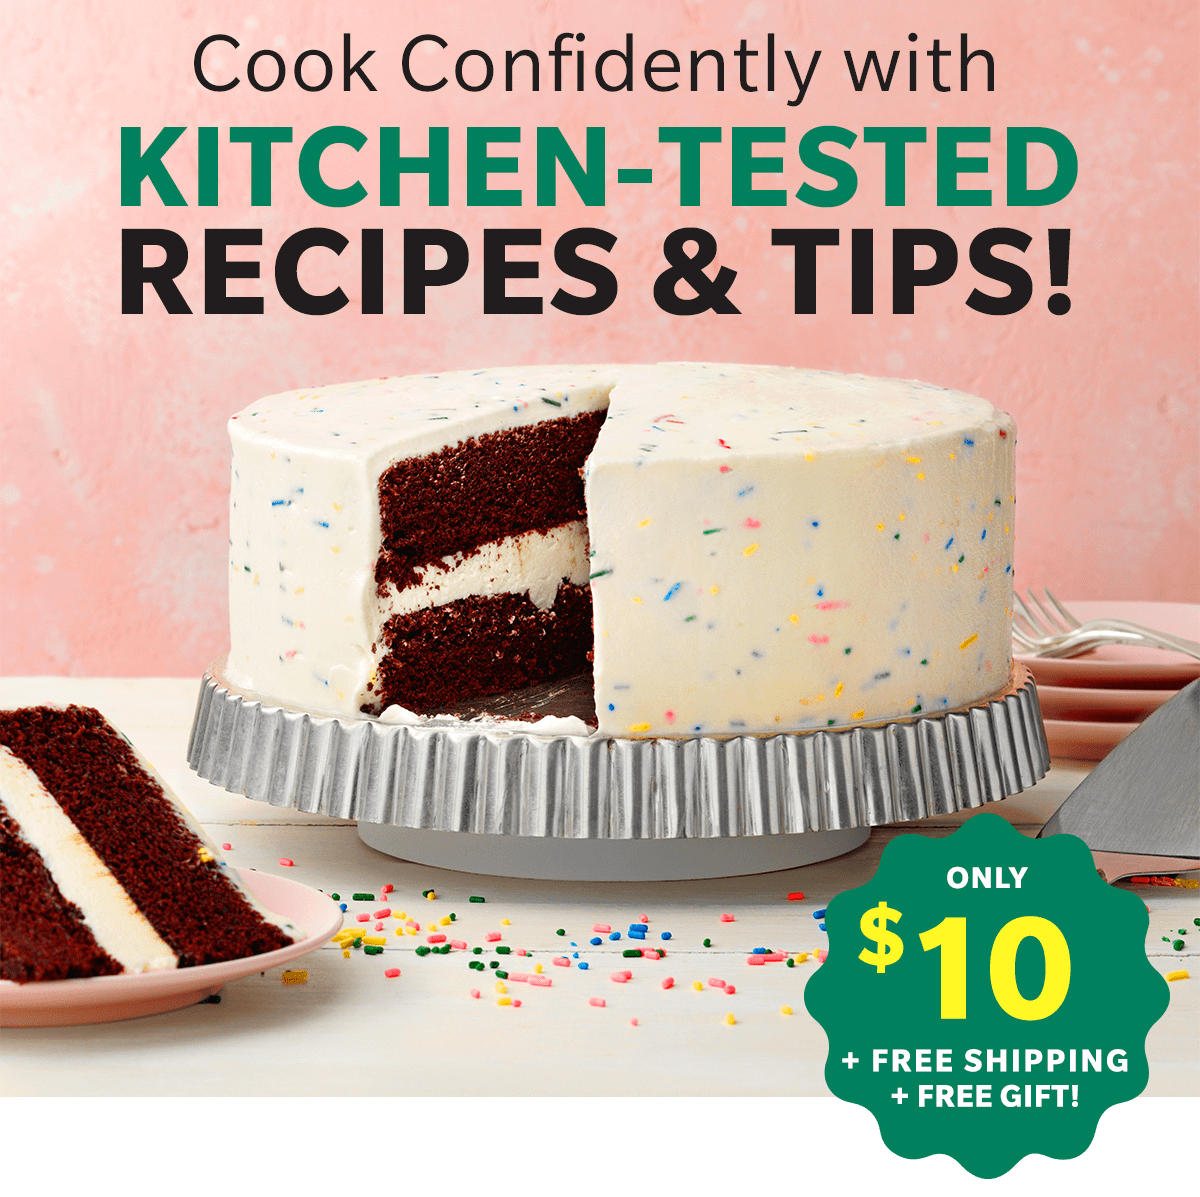 Cook Confidently with KITCHEN-TESTED RECIPES AND TIPS! Only $10+ Free Shipping + Free Gift!